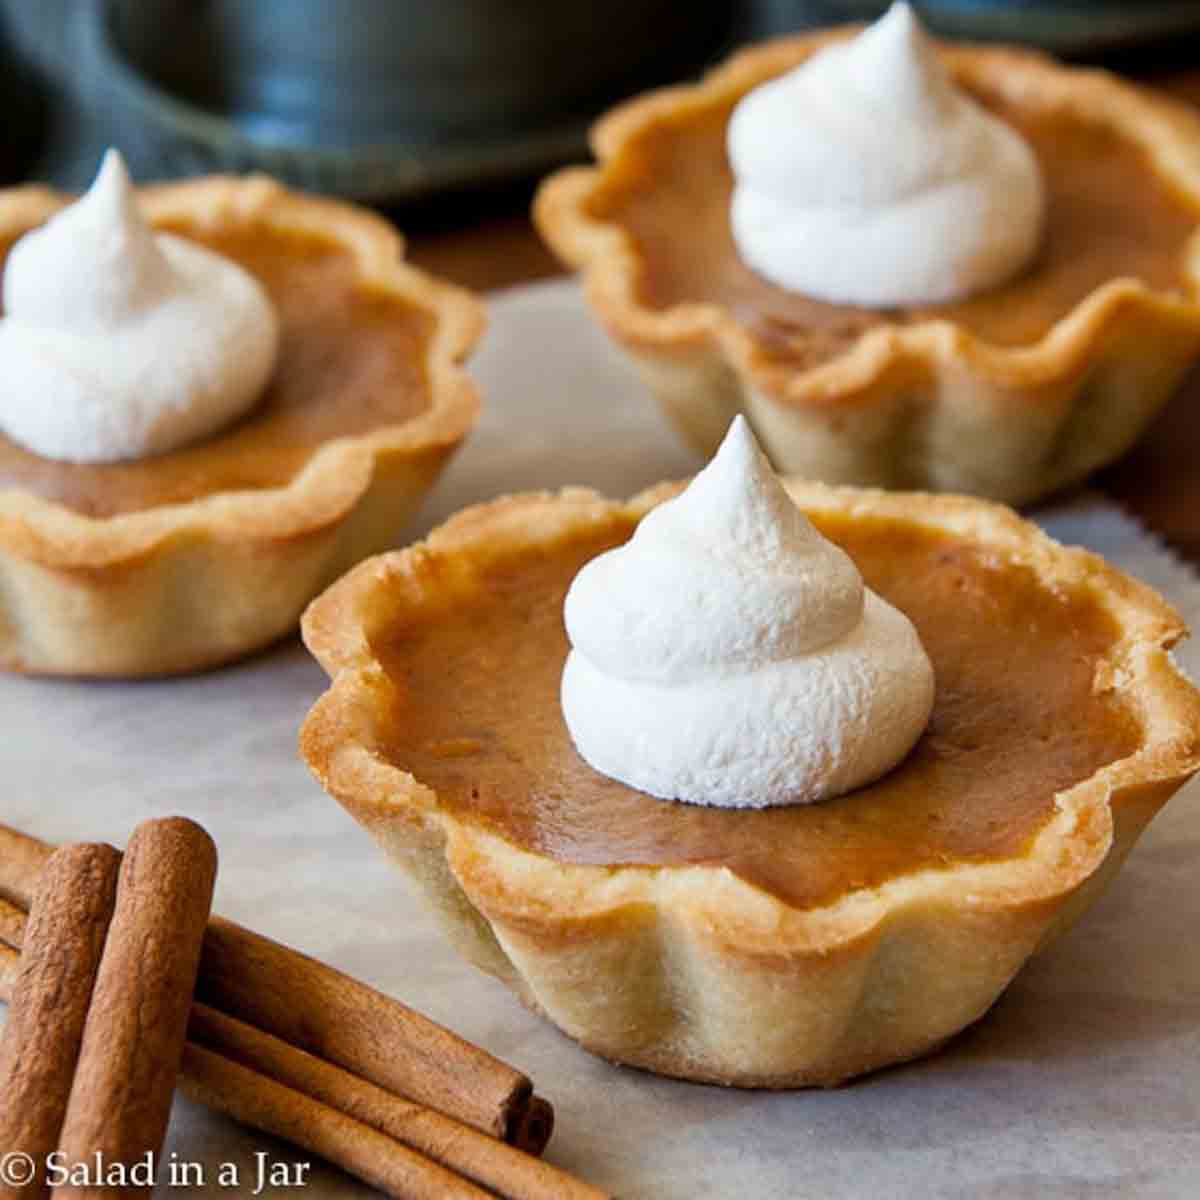 Ready to eat pumpkin mini-tarts with a shortbread crust and whipped cream on top.